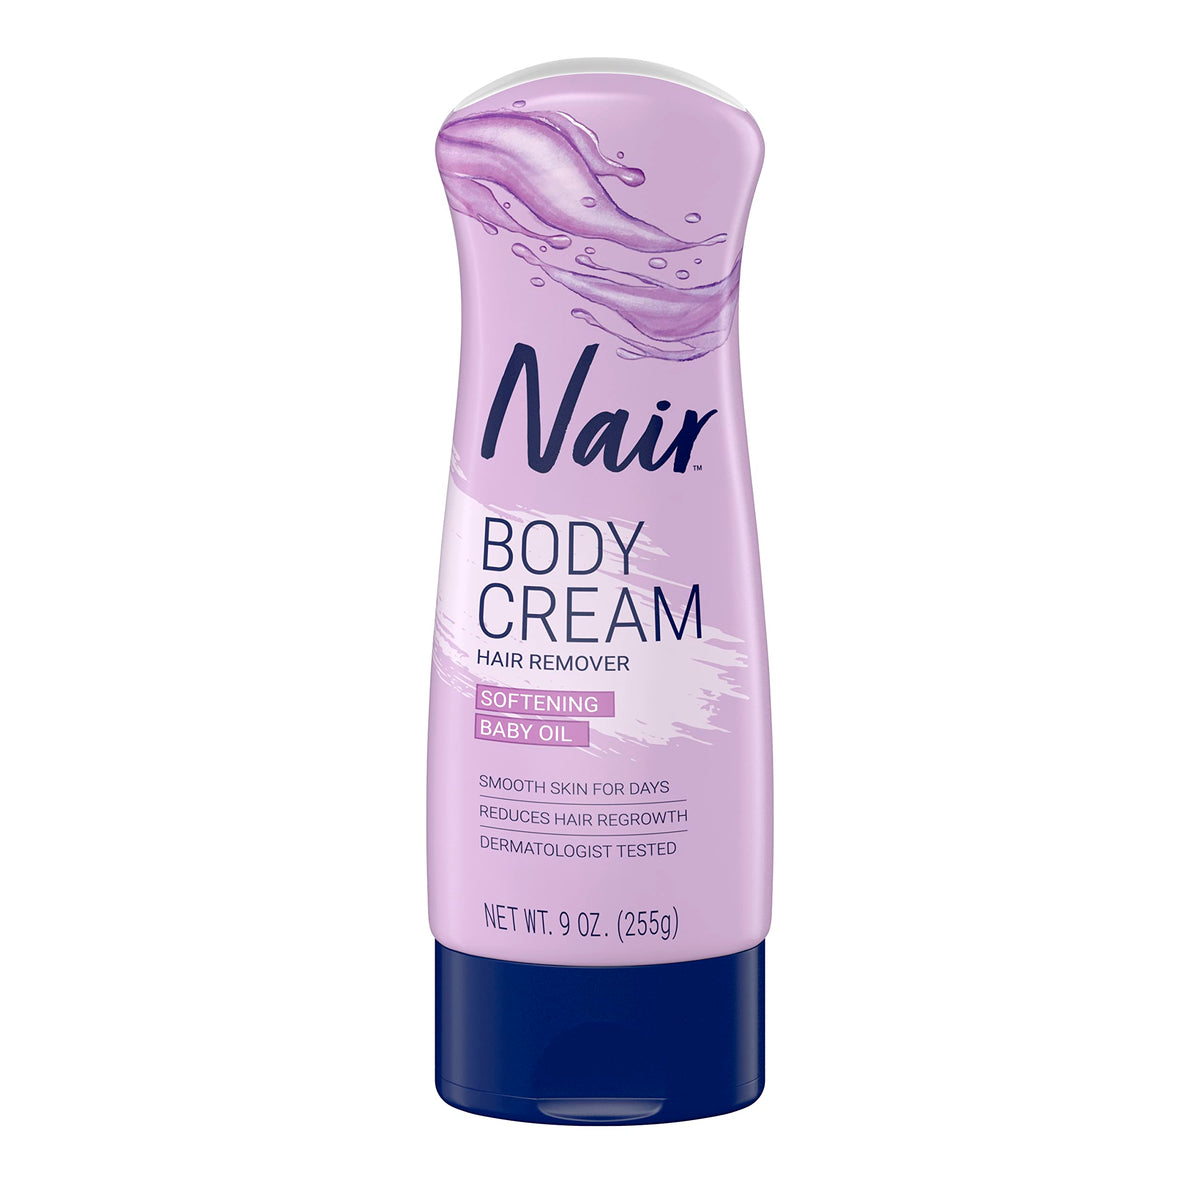 Nair Body Cream Hair Remover Soothing Baby Oil 9oz